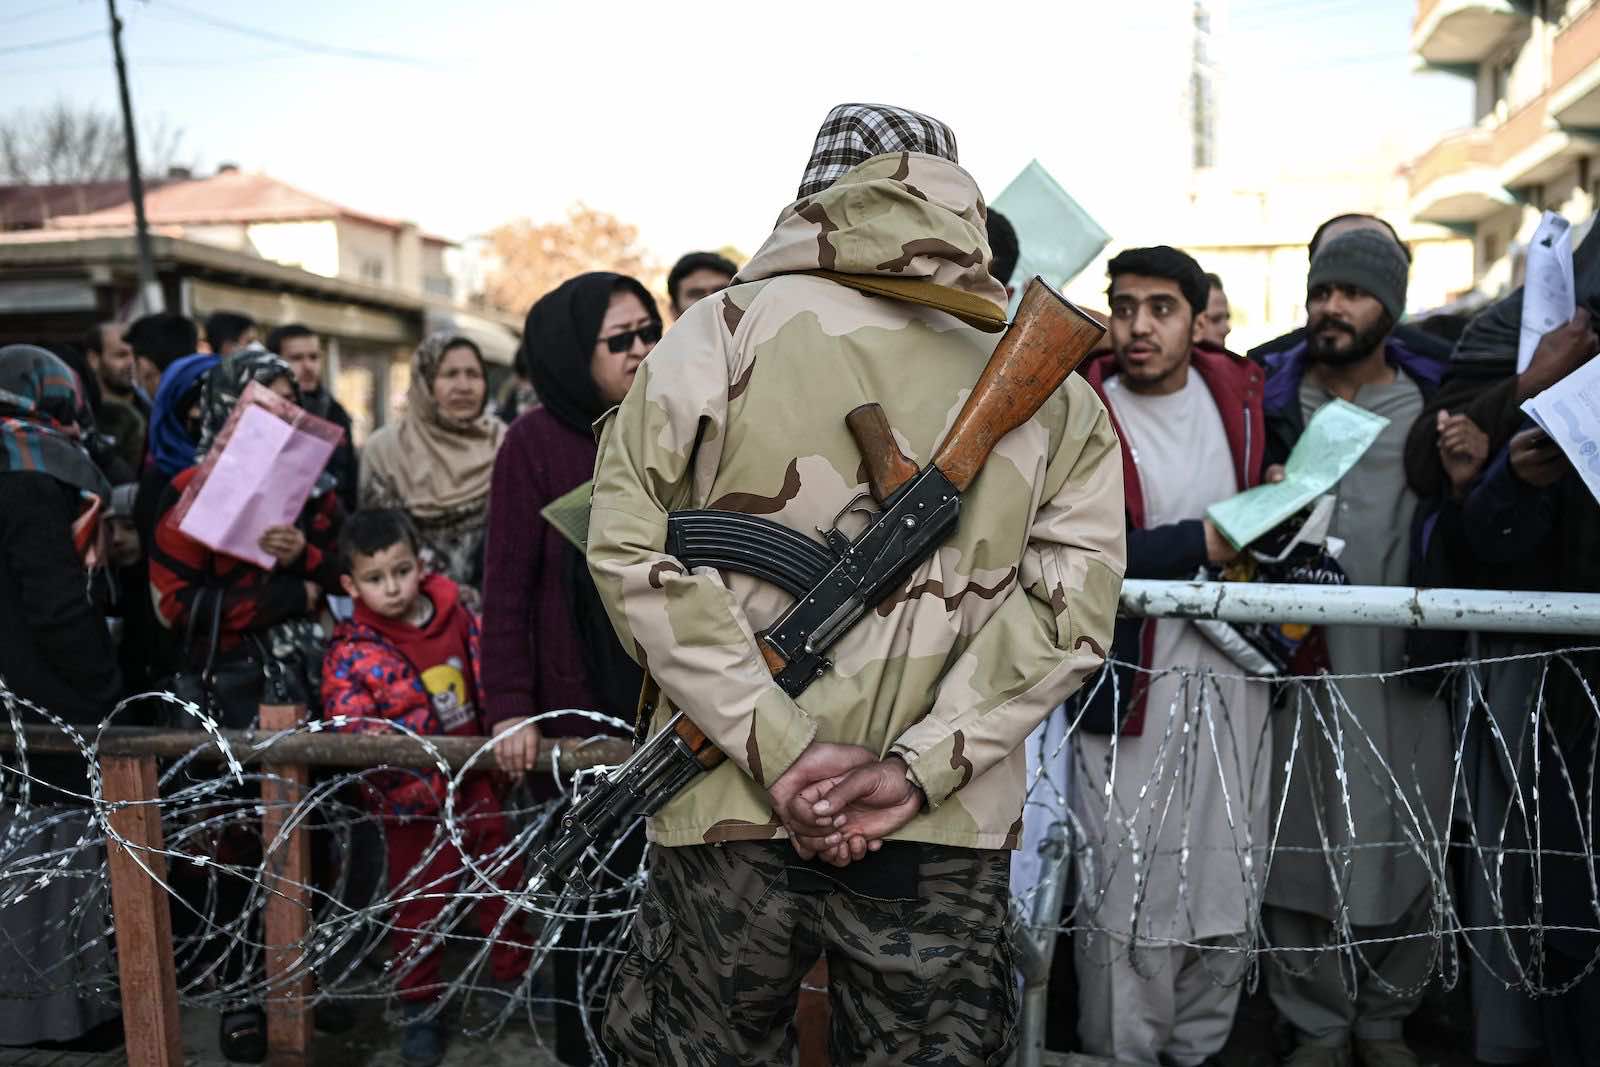 A Taliban fighter stands guard as people queue to enter the passport office at a checkpoint in Kabul this month (Mohd Rasfan/AFP via Getty Images)